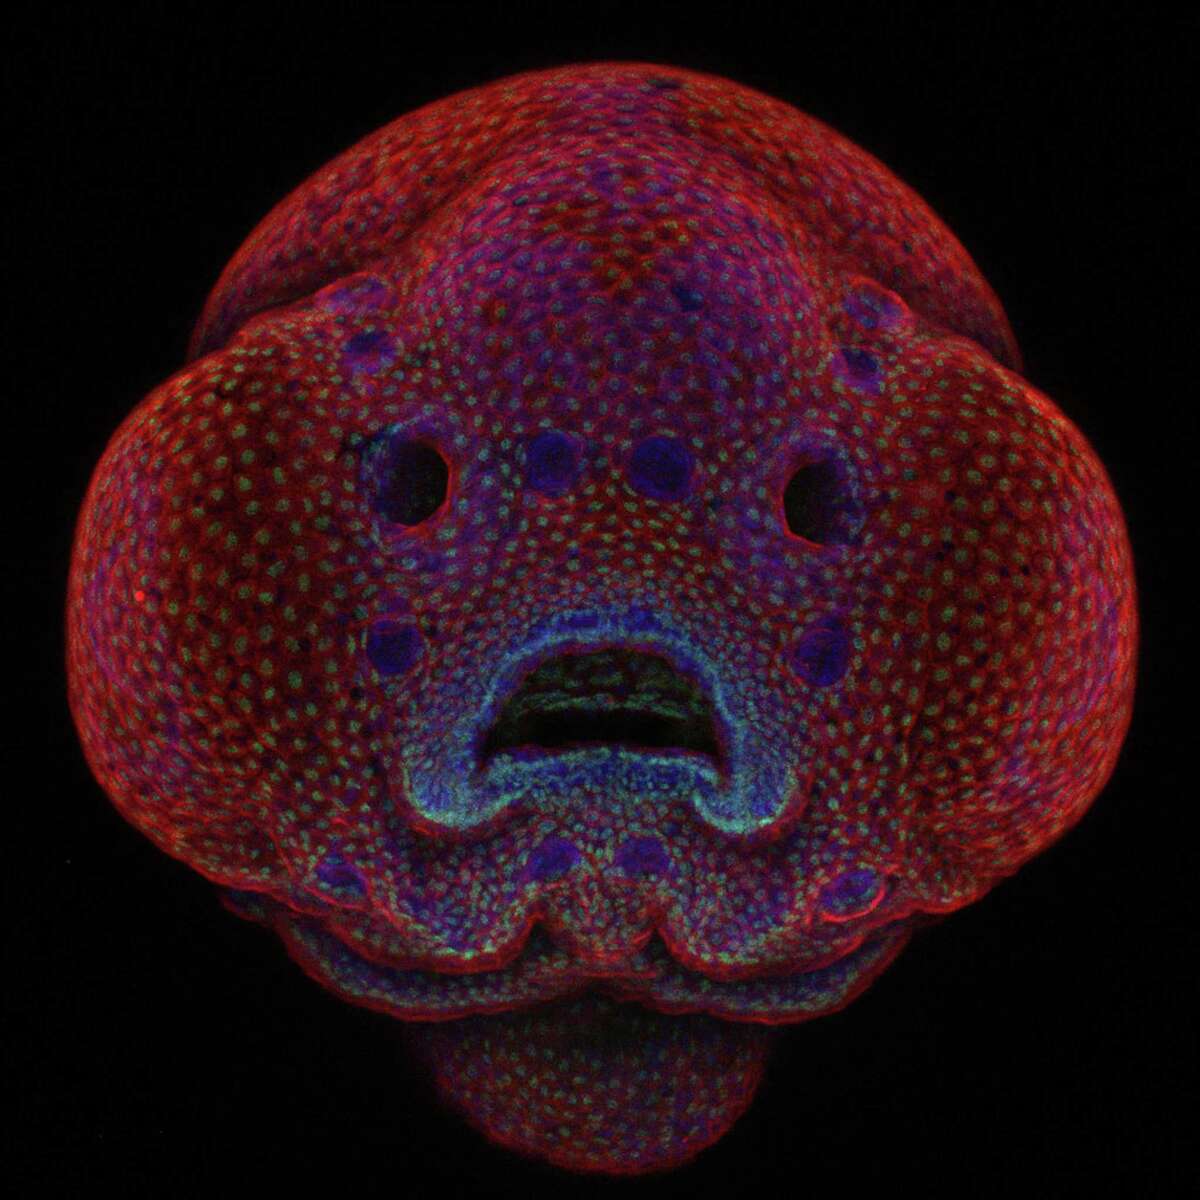 First place in the international Nikon Small World Exhibit competition was awarded to Dr. Oscar Ruiz at the University of Texas Anderson Cancer Center in Houston for his photo of a 4-day-old zebra fish embryo. It is on view at the Bruce Museum in Greenwich.